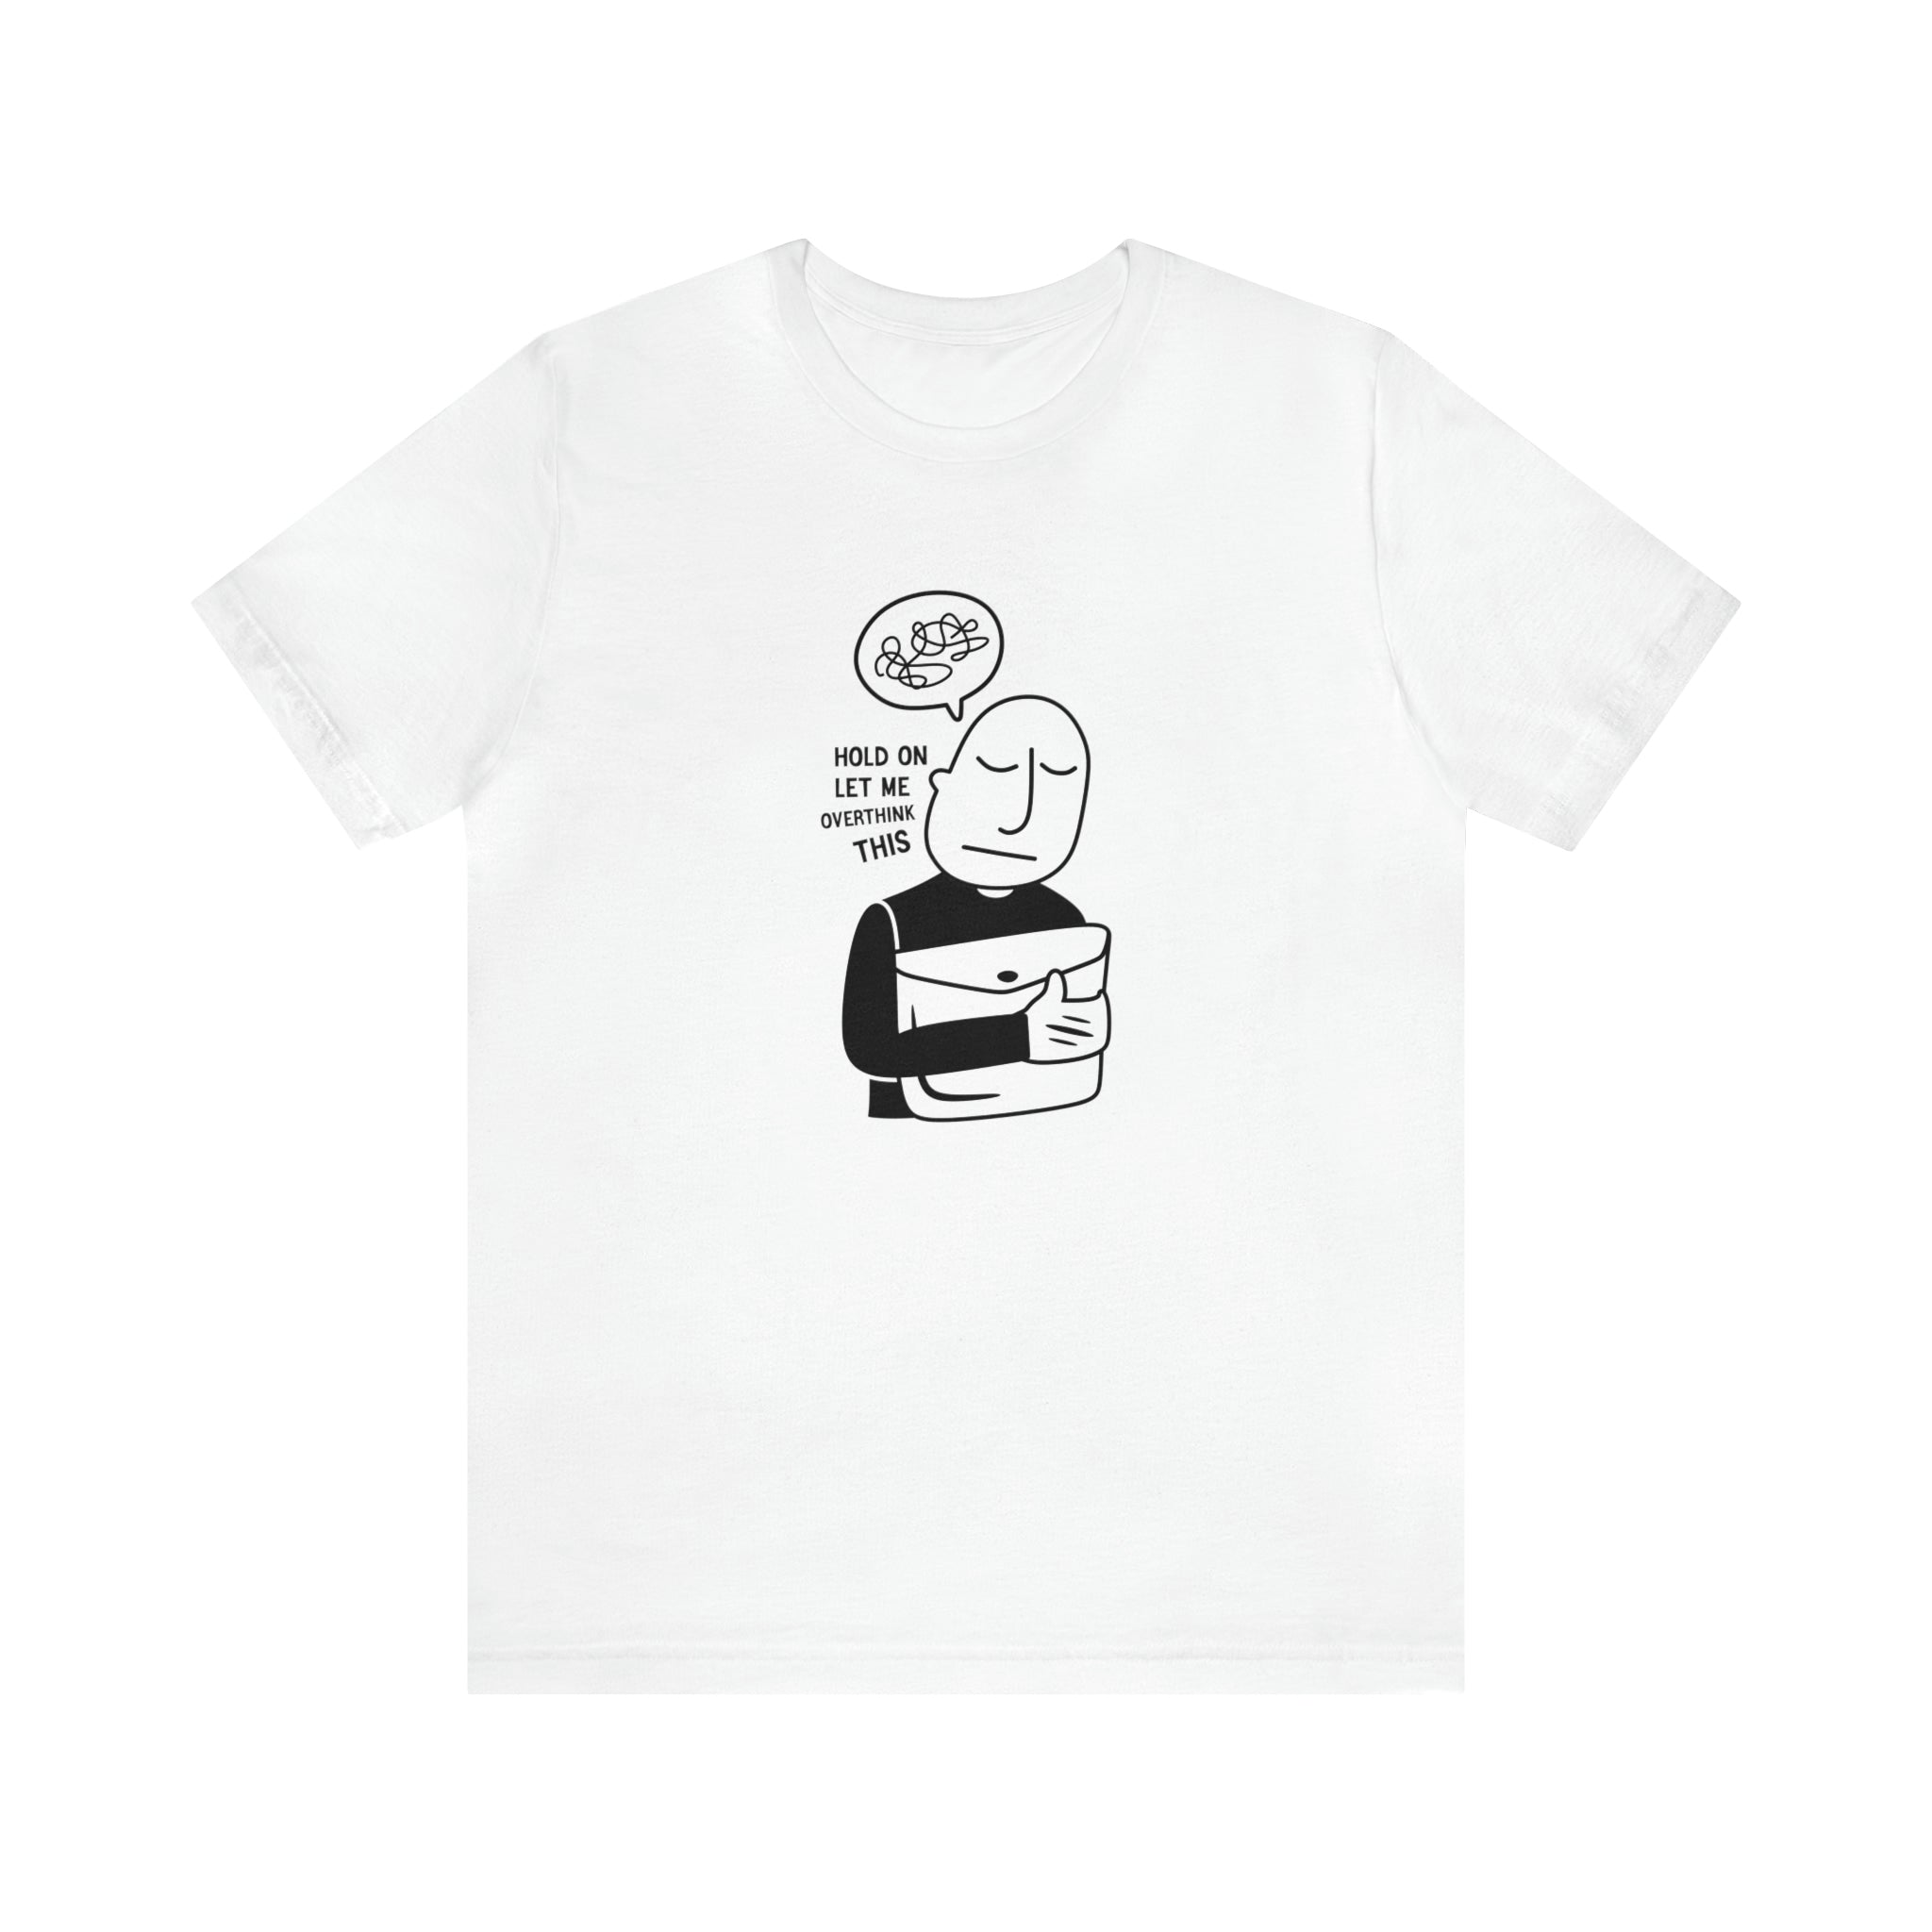 A white Hold On Let Me Overthink This T-Shirt featuring an image of a man holding a book.